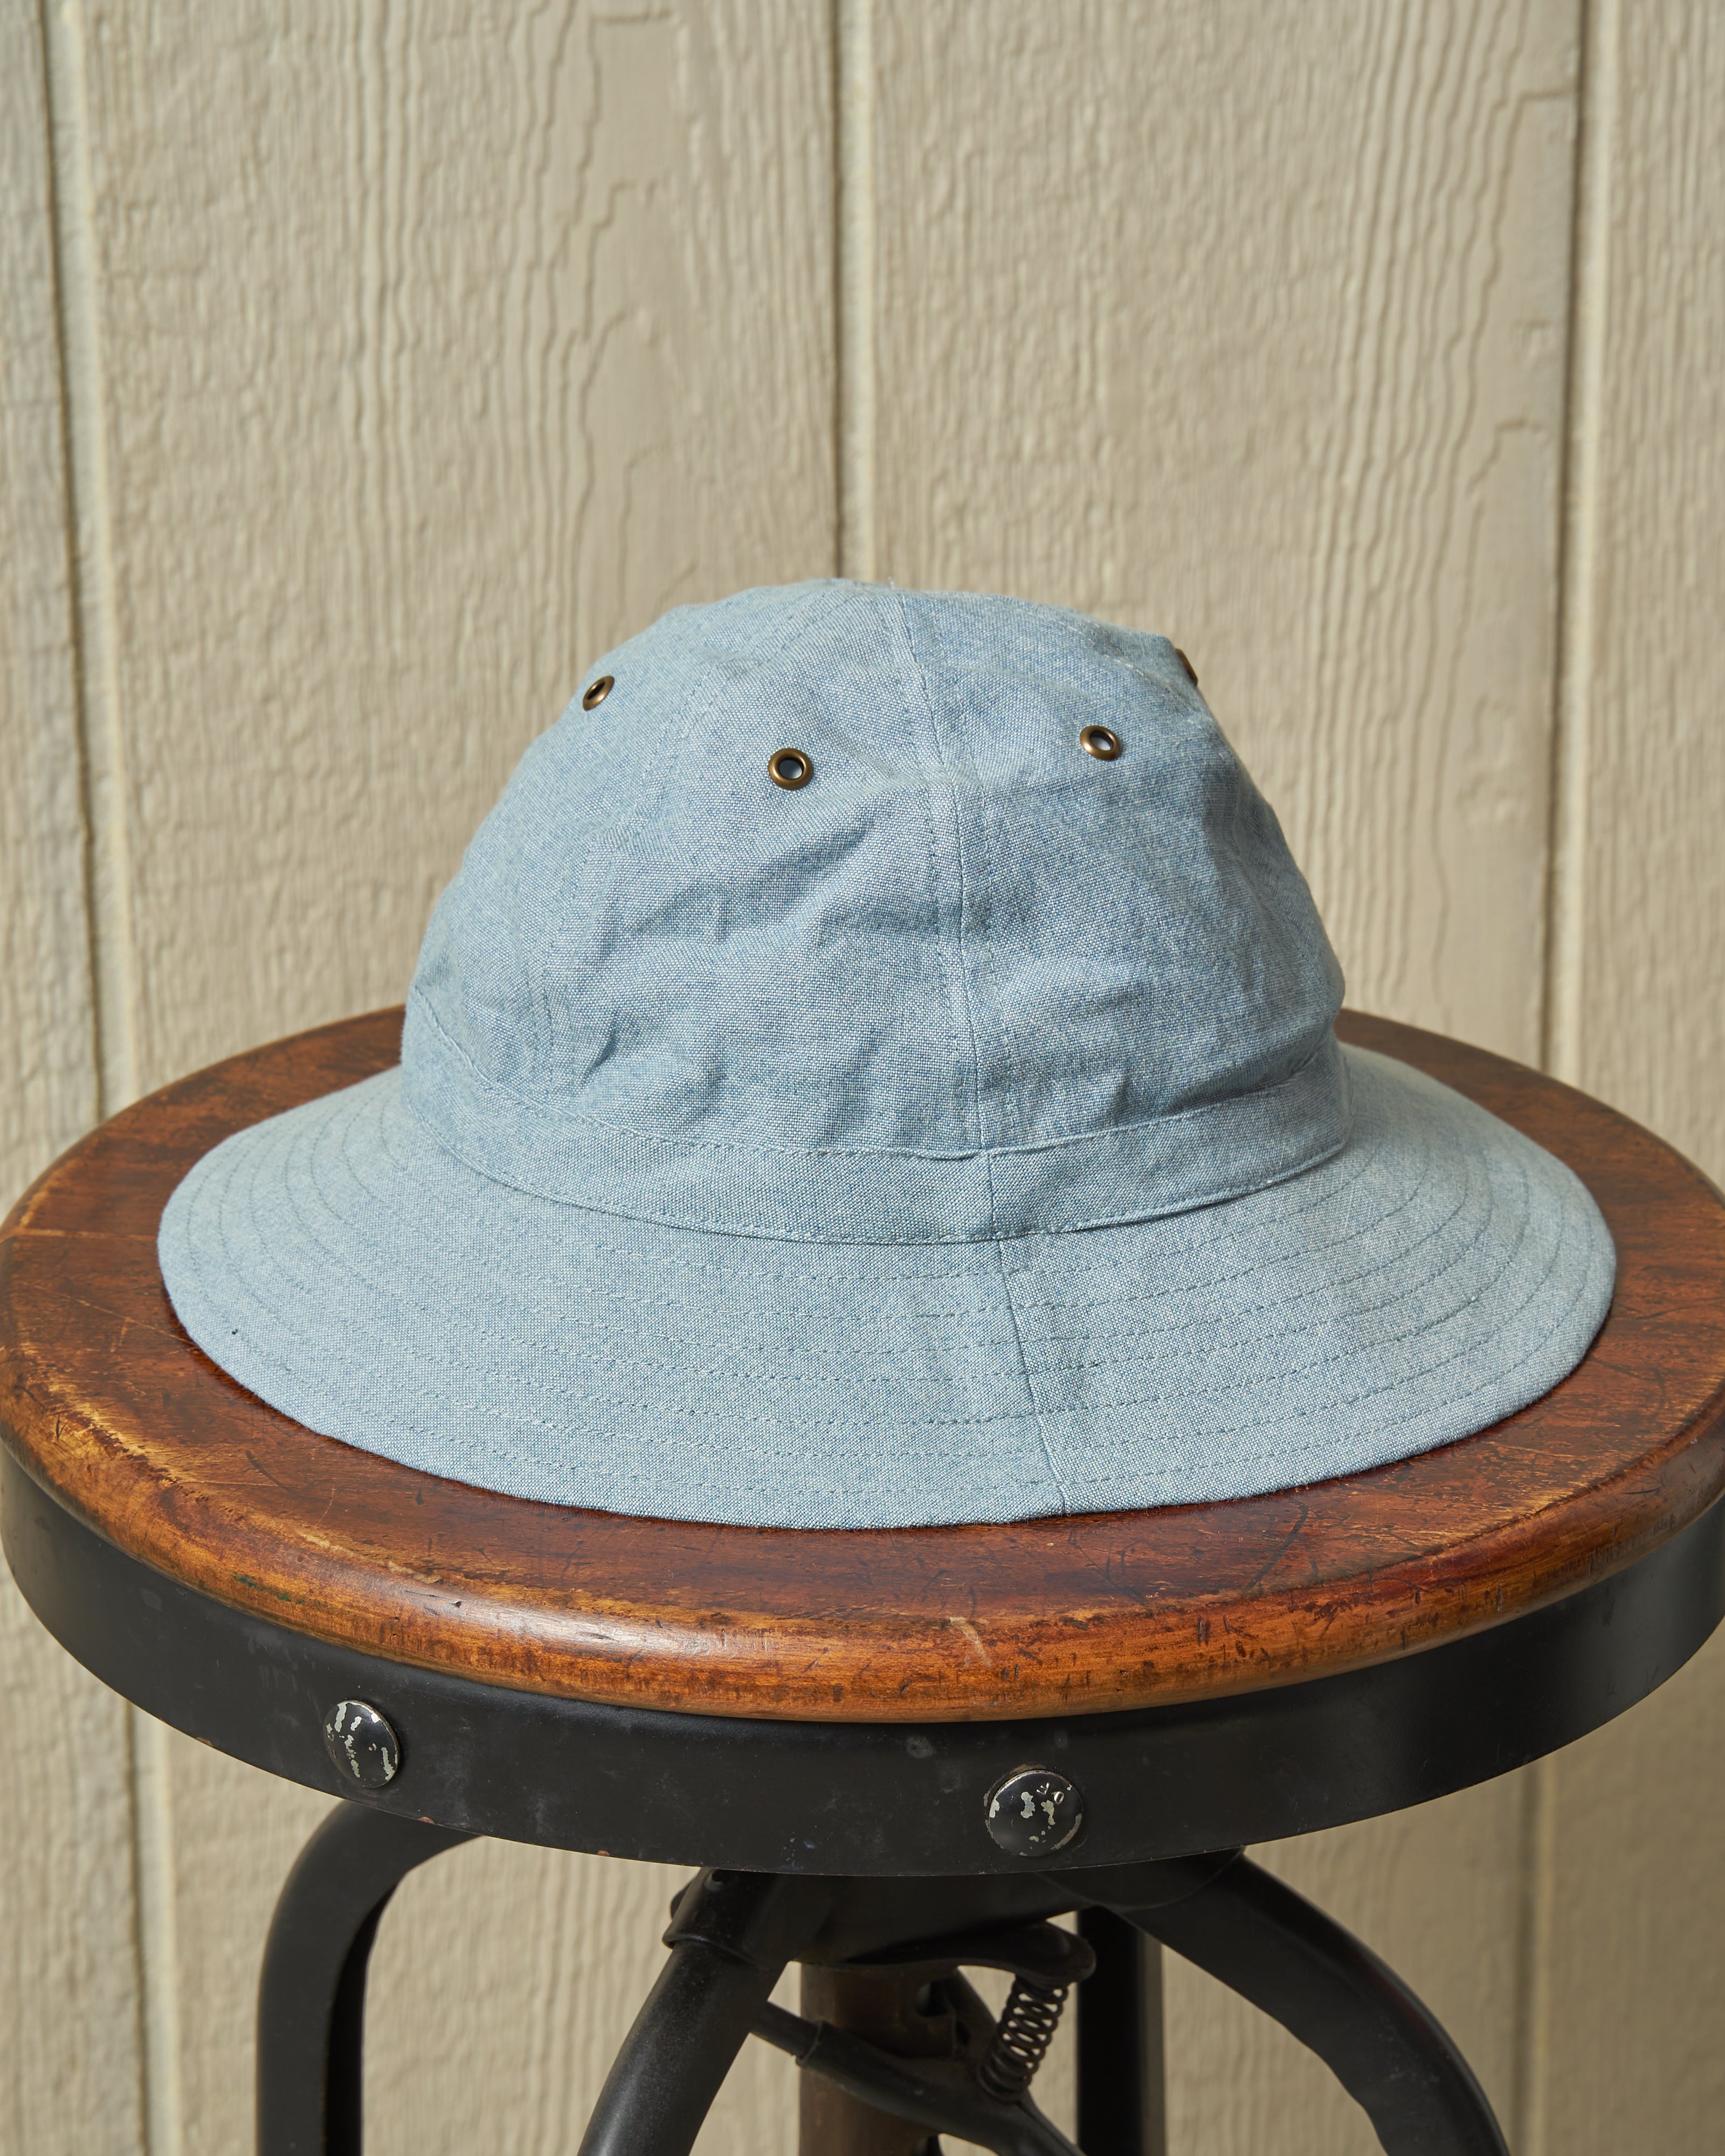 Standard Sailing Hat in Chambray – Quaker Marine Supply Co.